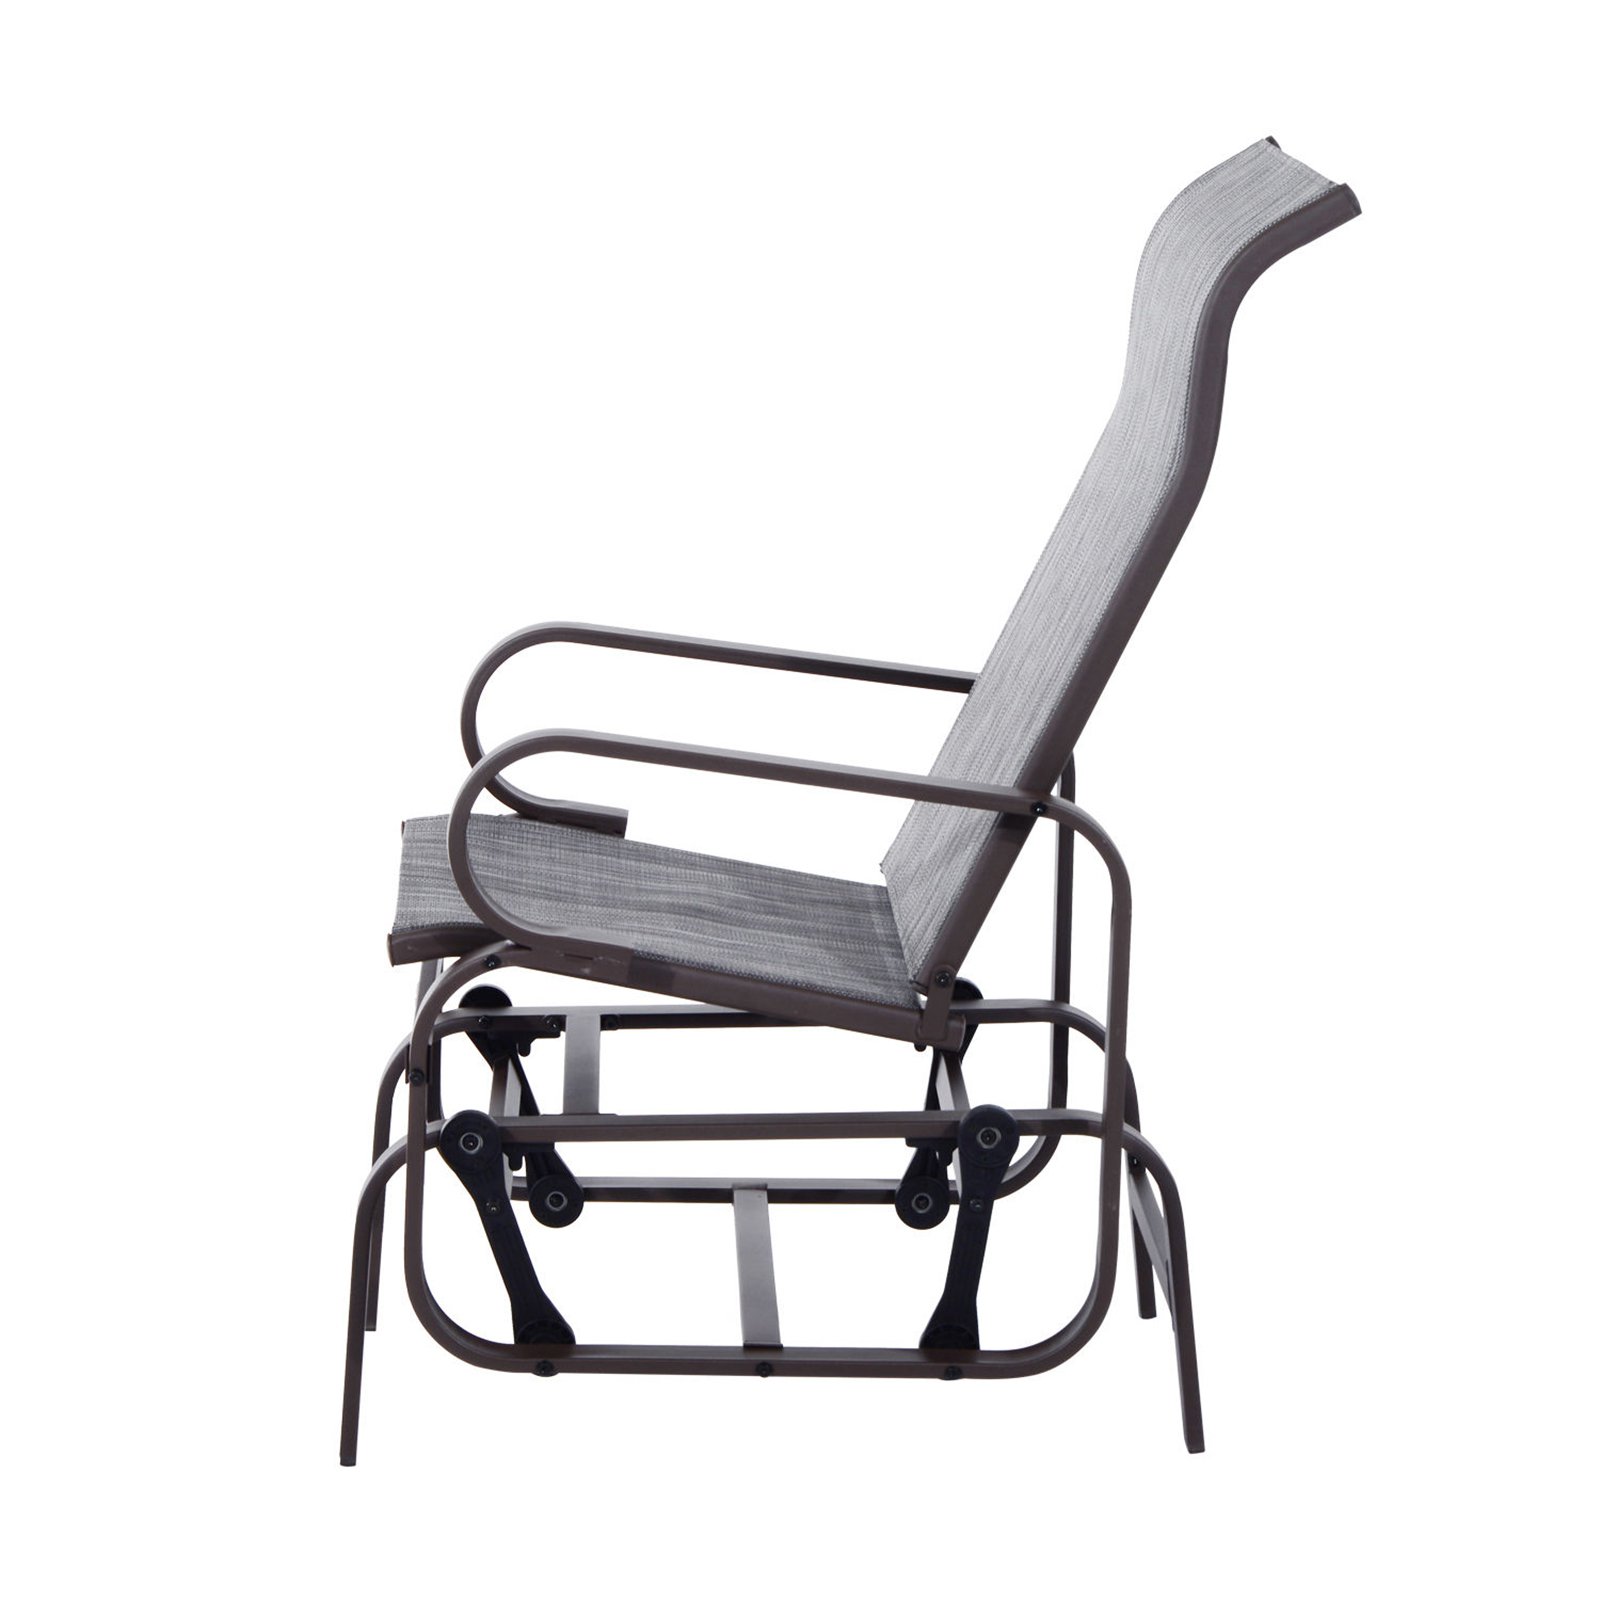 Outsunny Gliding Lounger Chair with Lightweight Construction, Gray - image 3 of 6